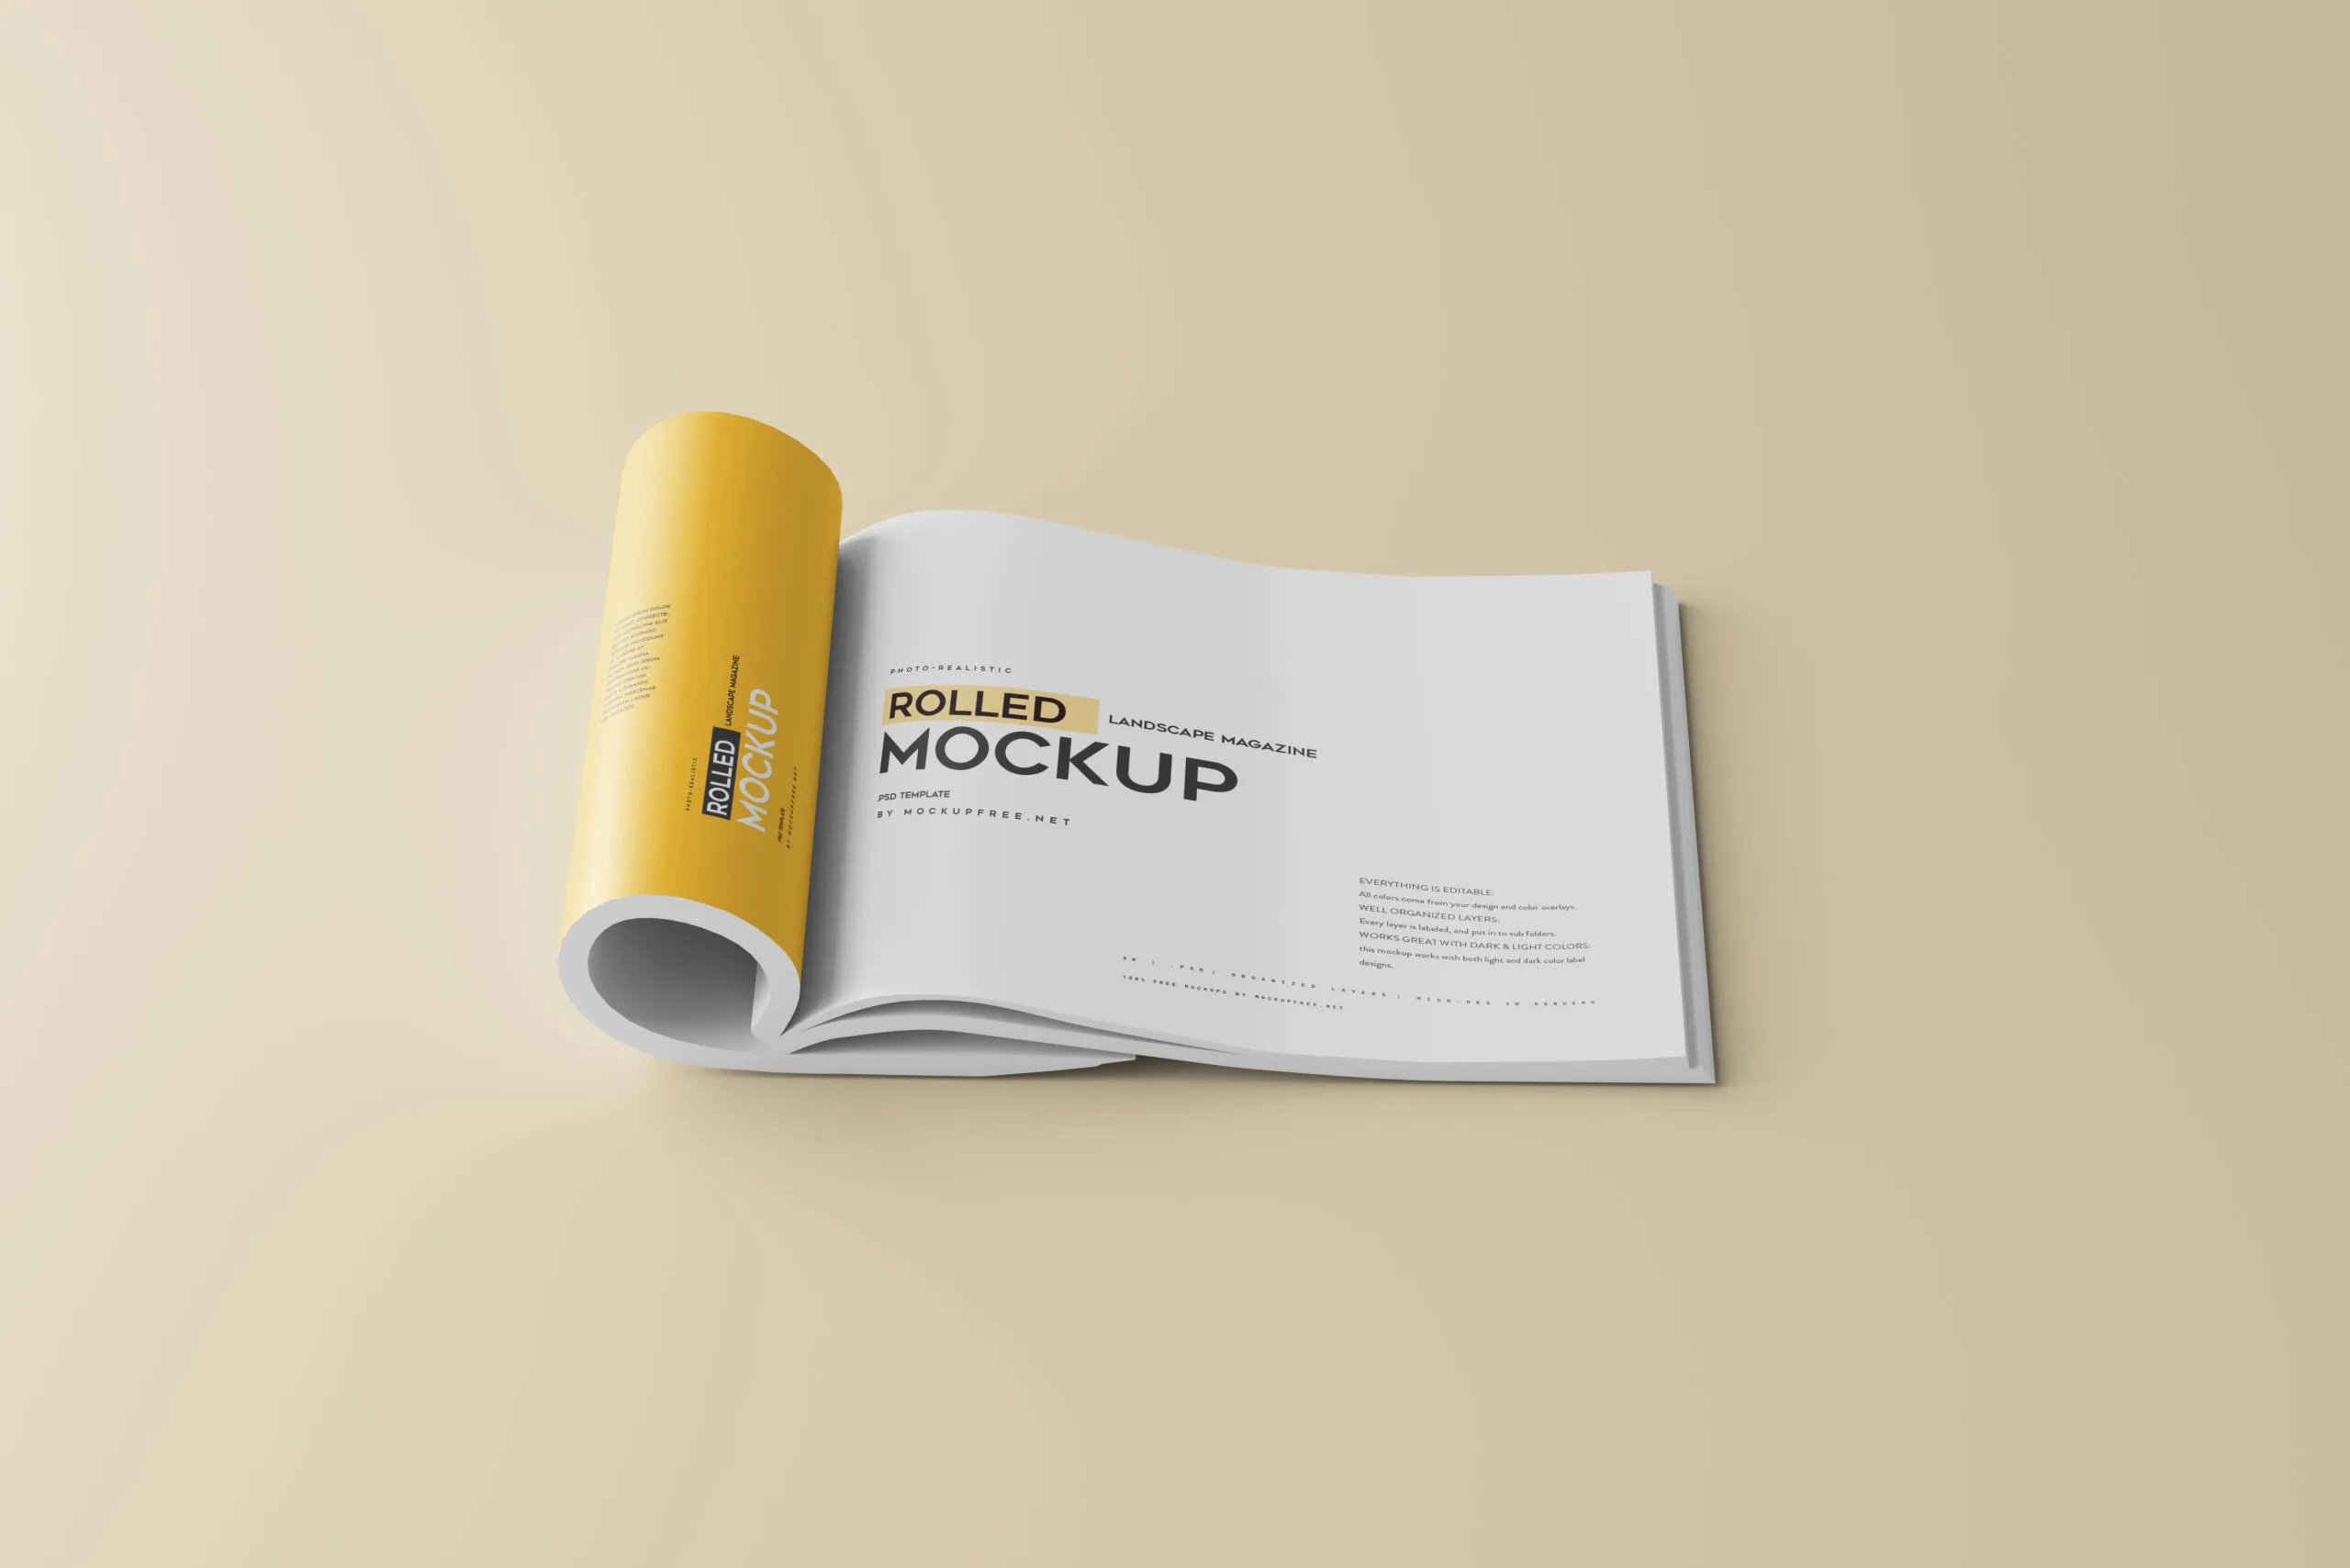 5 Landscape Rolled Up Magazine Mockup in Different Views FREE PSD